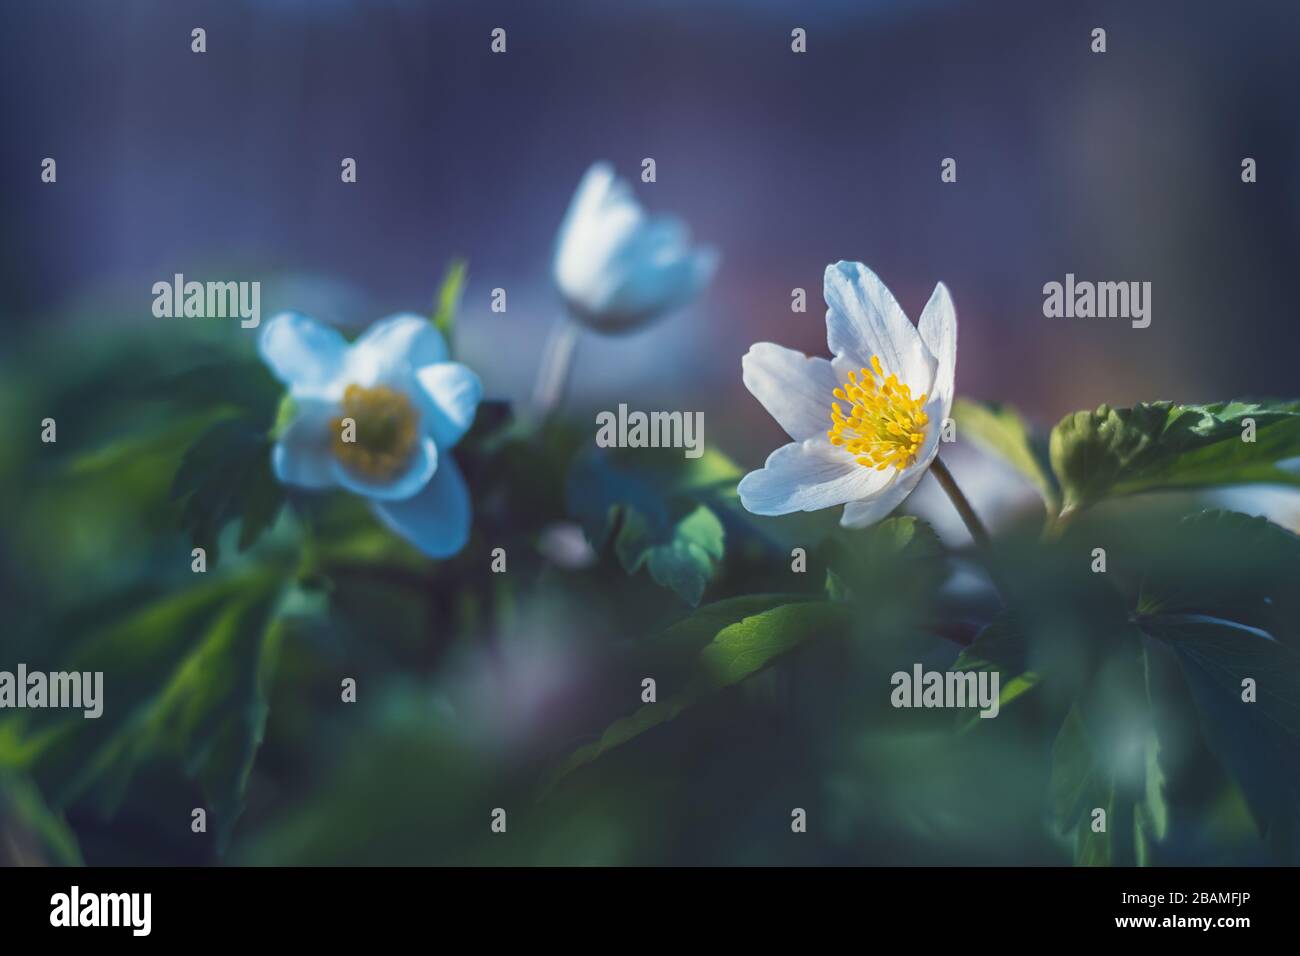 Anemone nemorosa - white flowers with green leaves, close up view Stock Photo